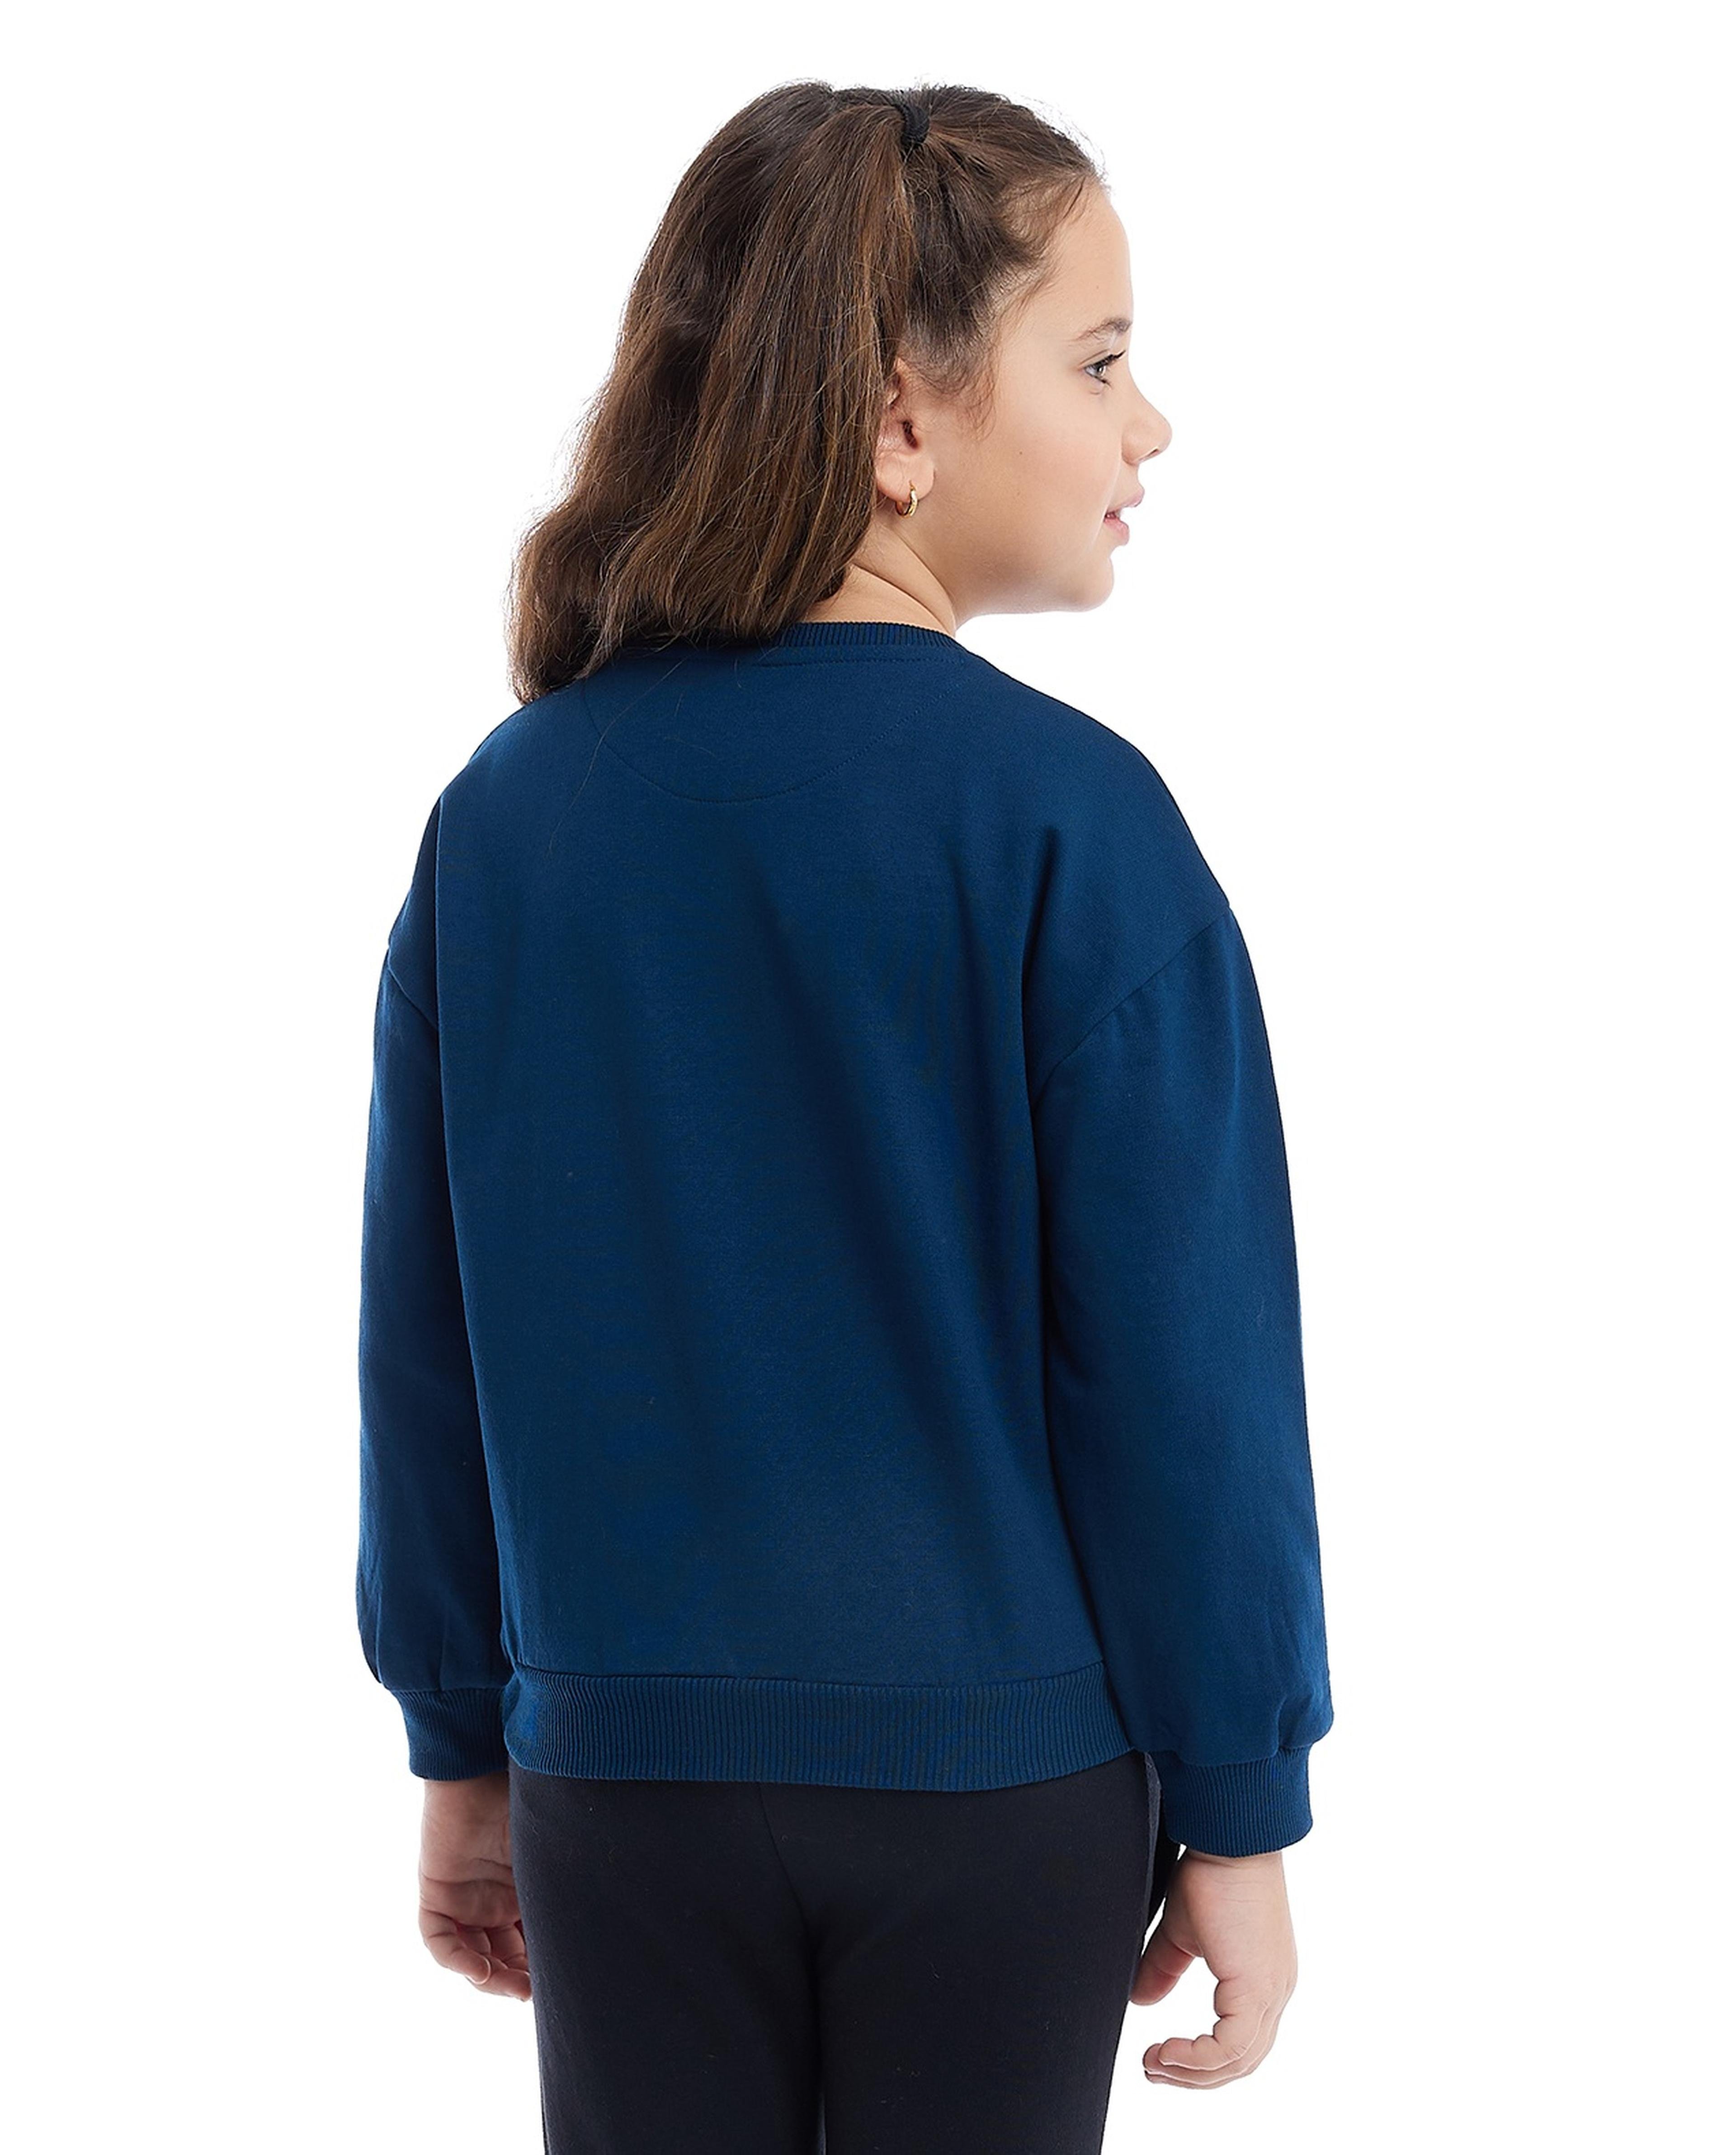 Appliqued Sweatshirt with Crew Neck and Long Sleeves